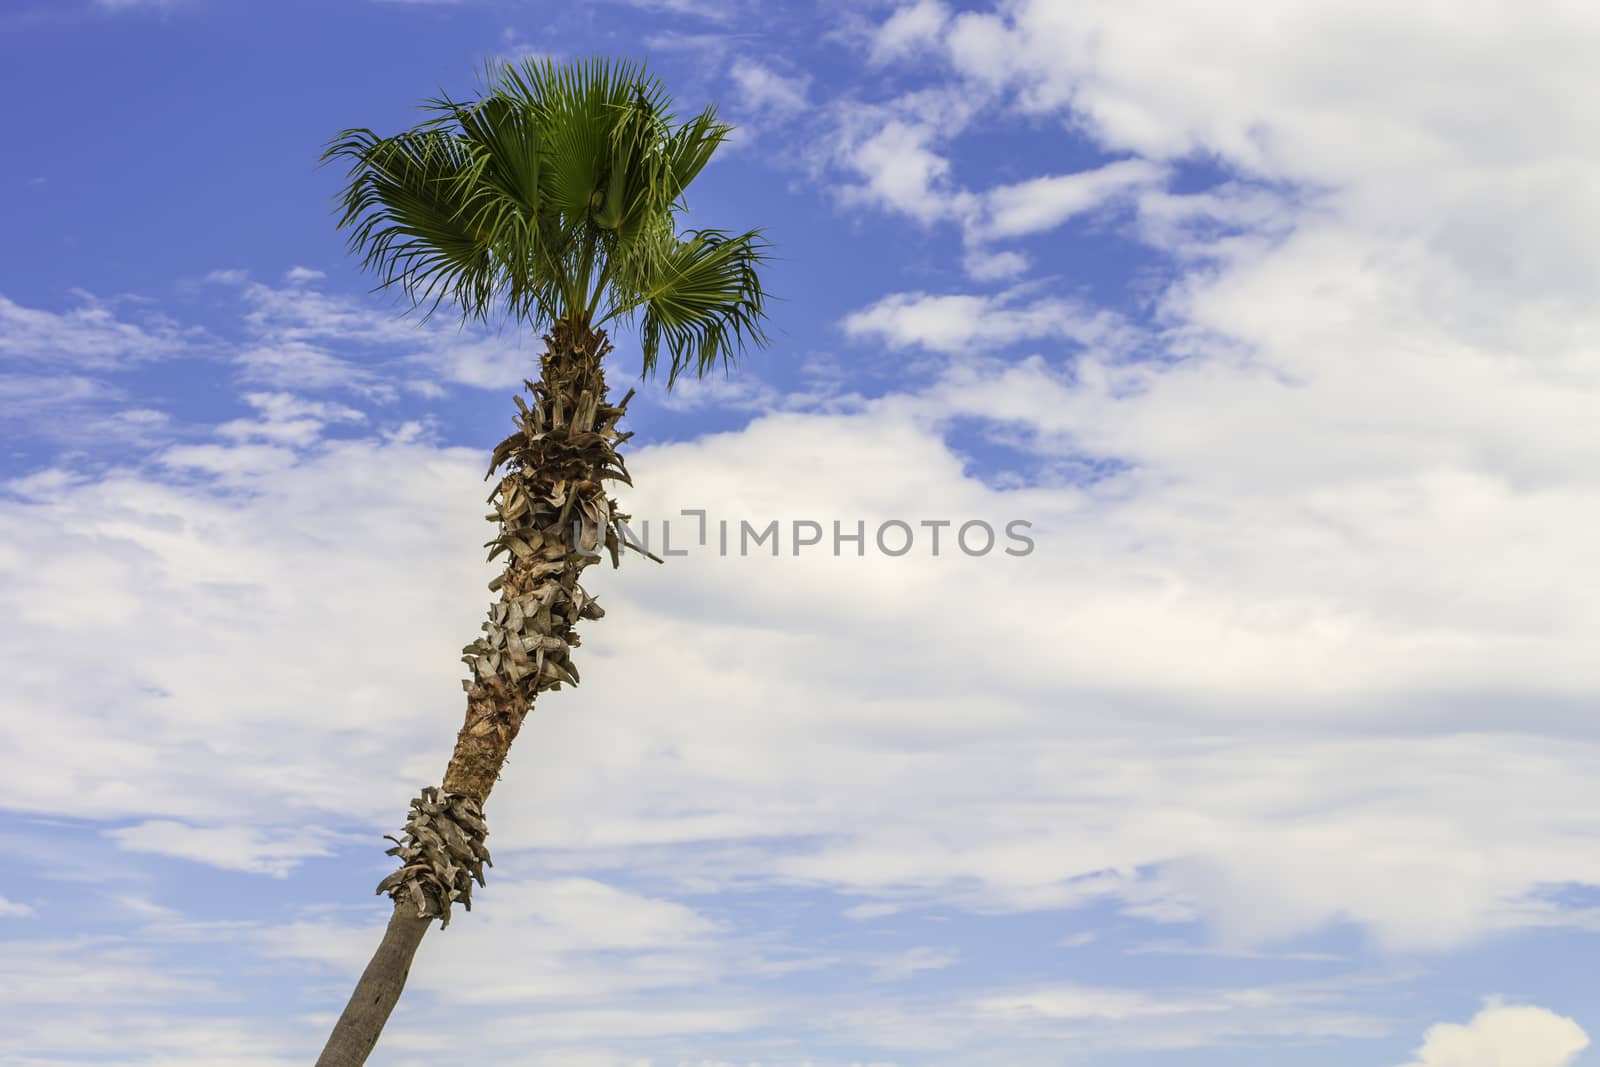 An isolated palm tree surrounded by a bright blue sky and clouds.